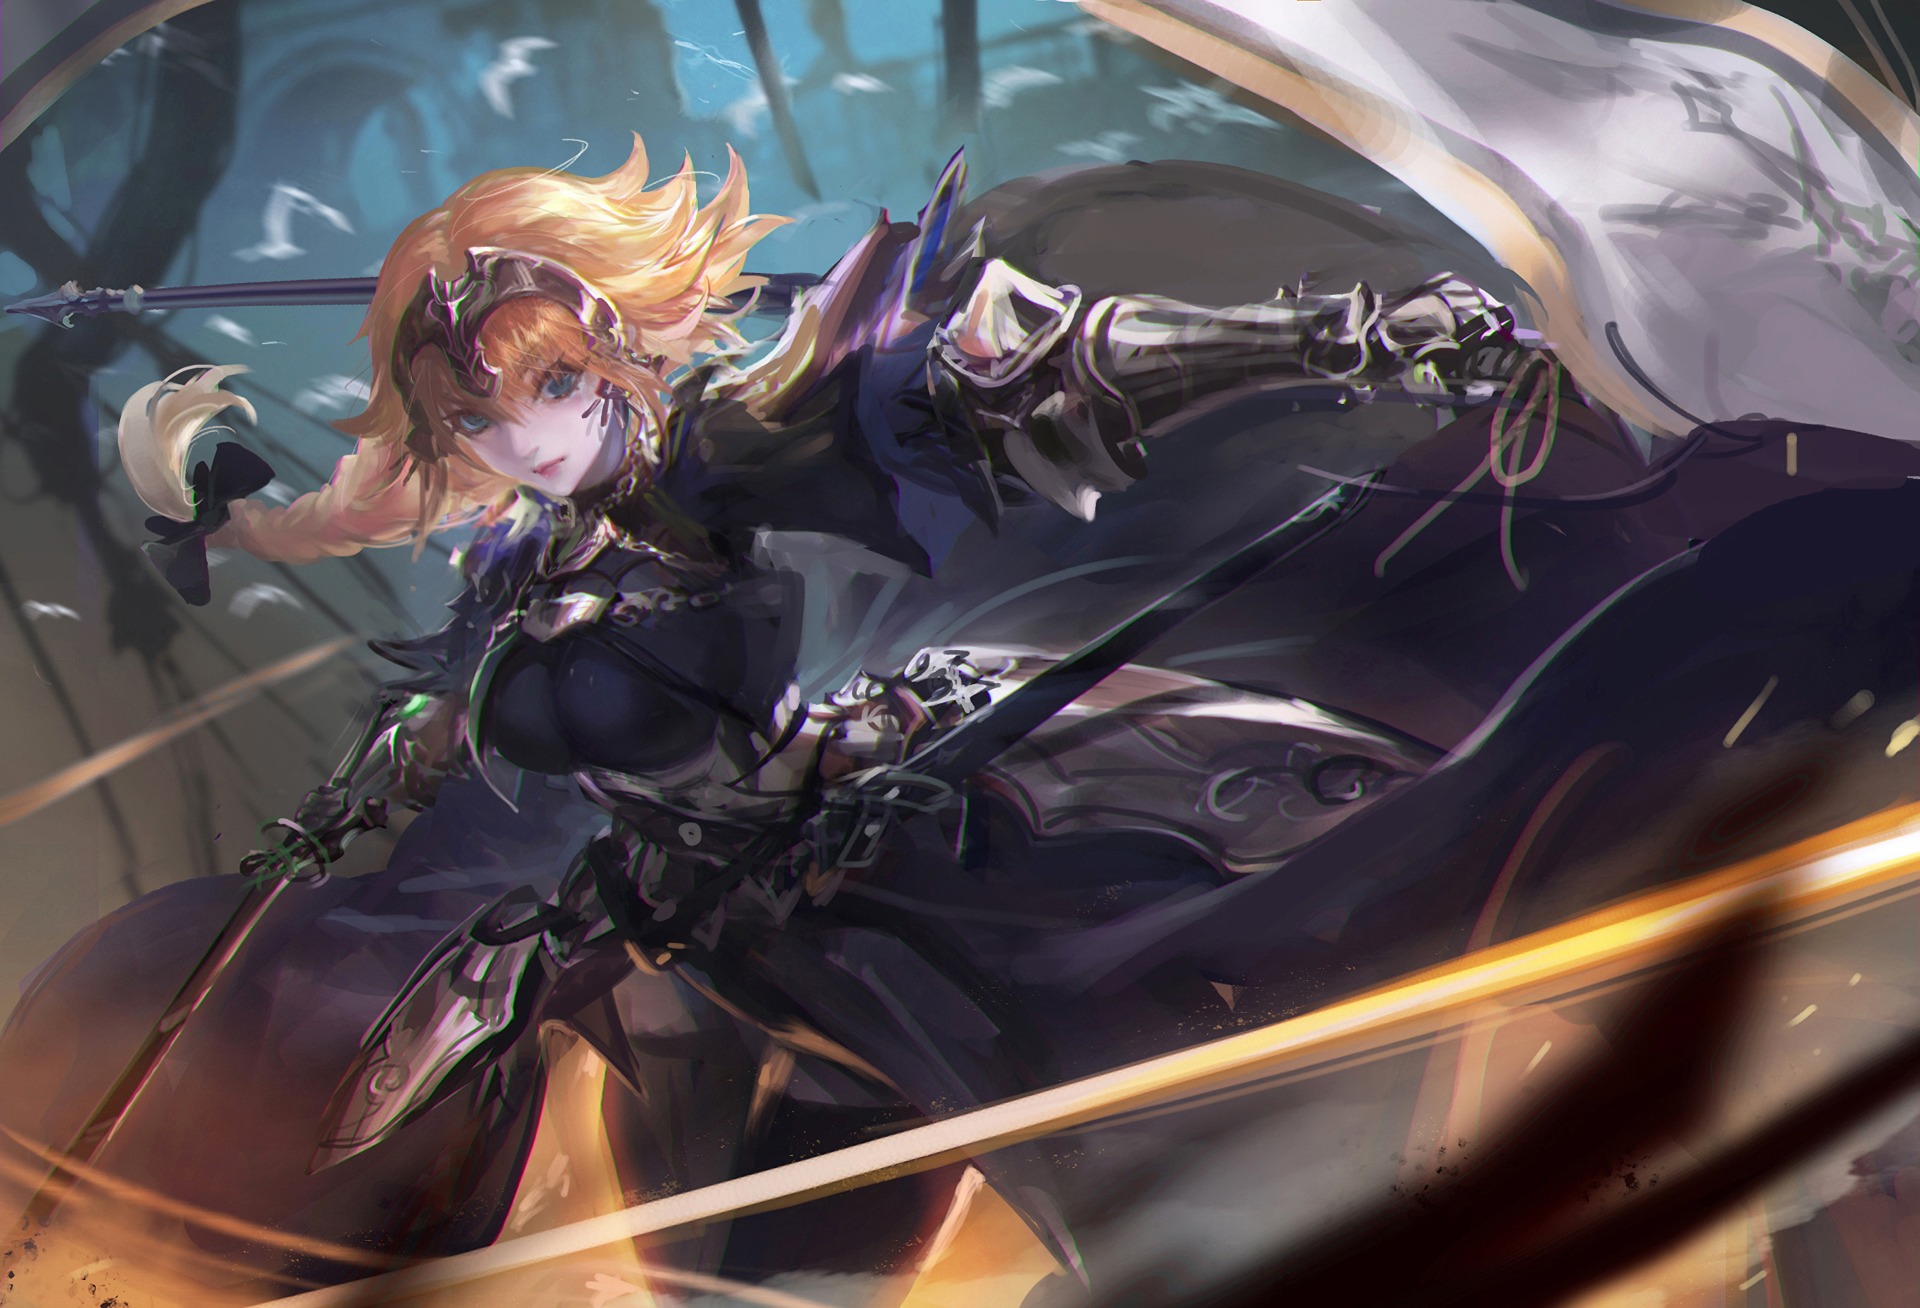 Download wallpapers from anime Fate/Apocrypha with tags: Jeanne d'Arc,...